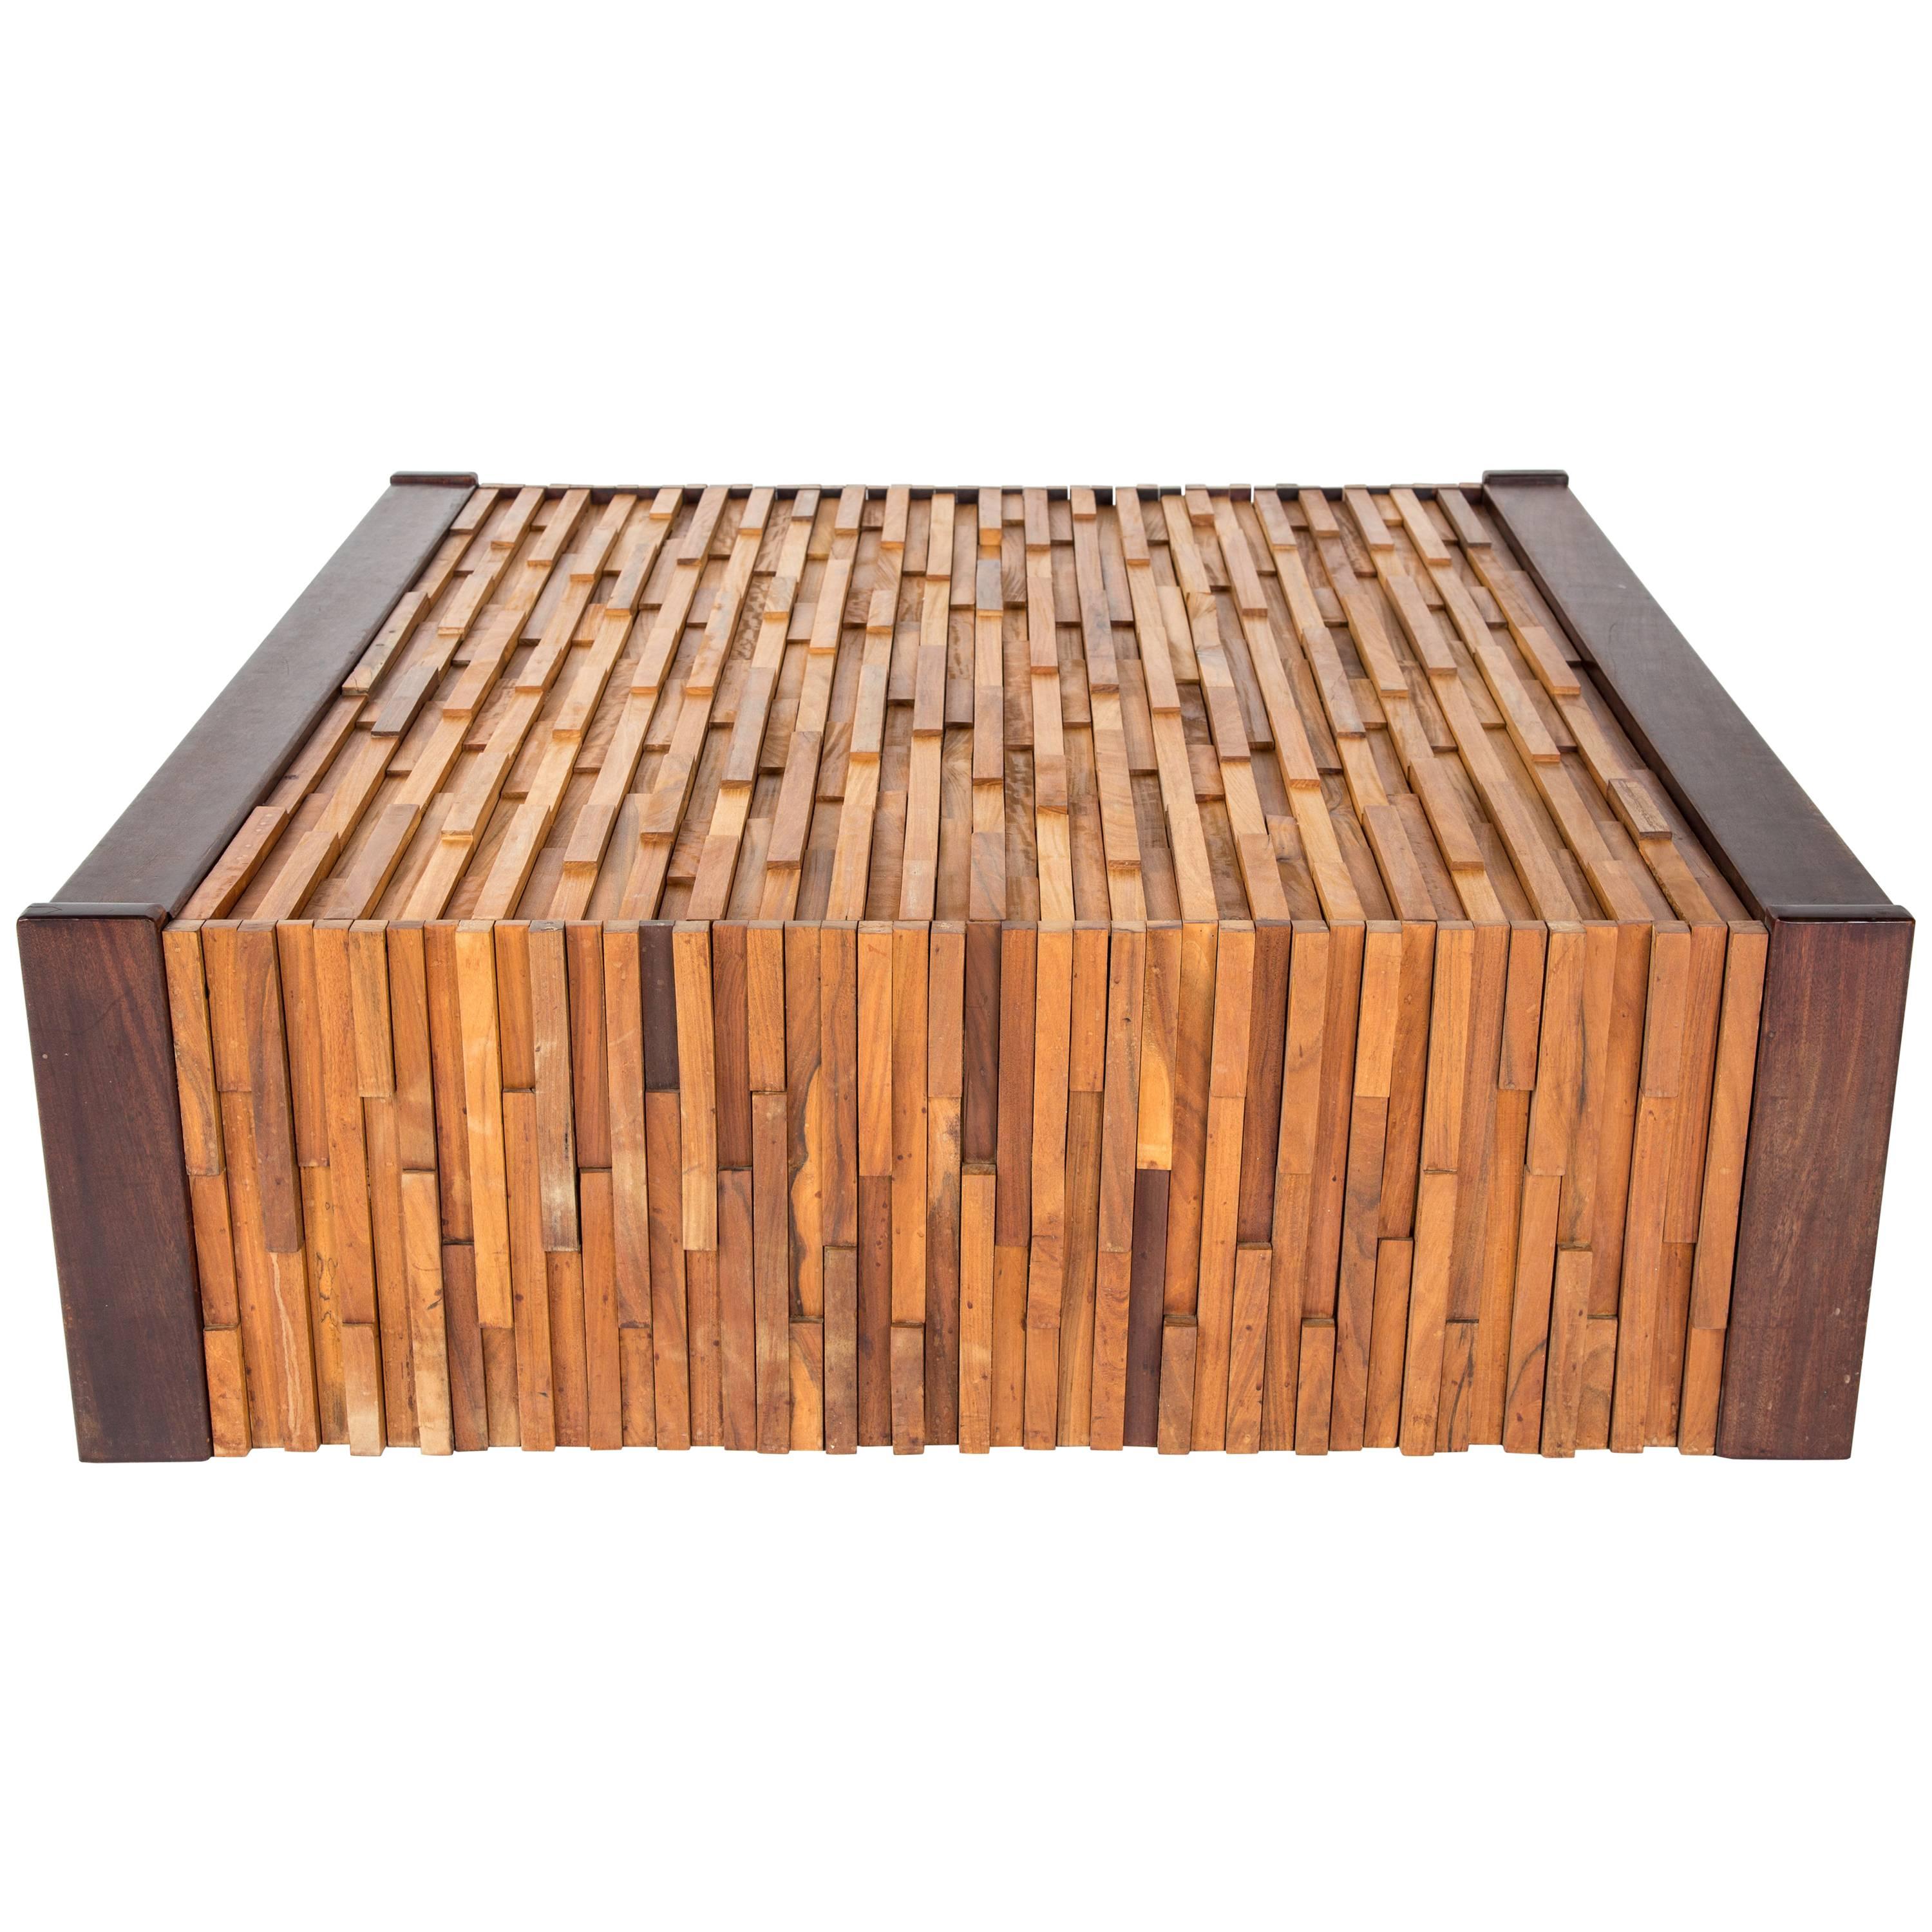 PERCIFAL LAFER mixed tropical wood coffee table, Brazilian brutalist style 